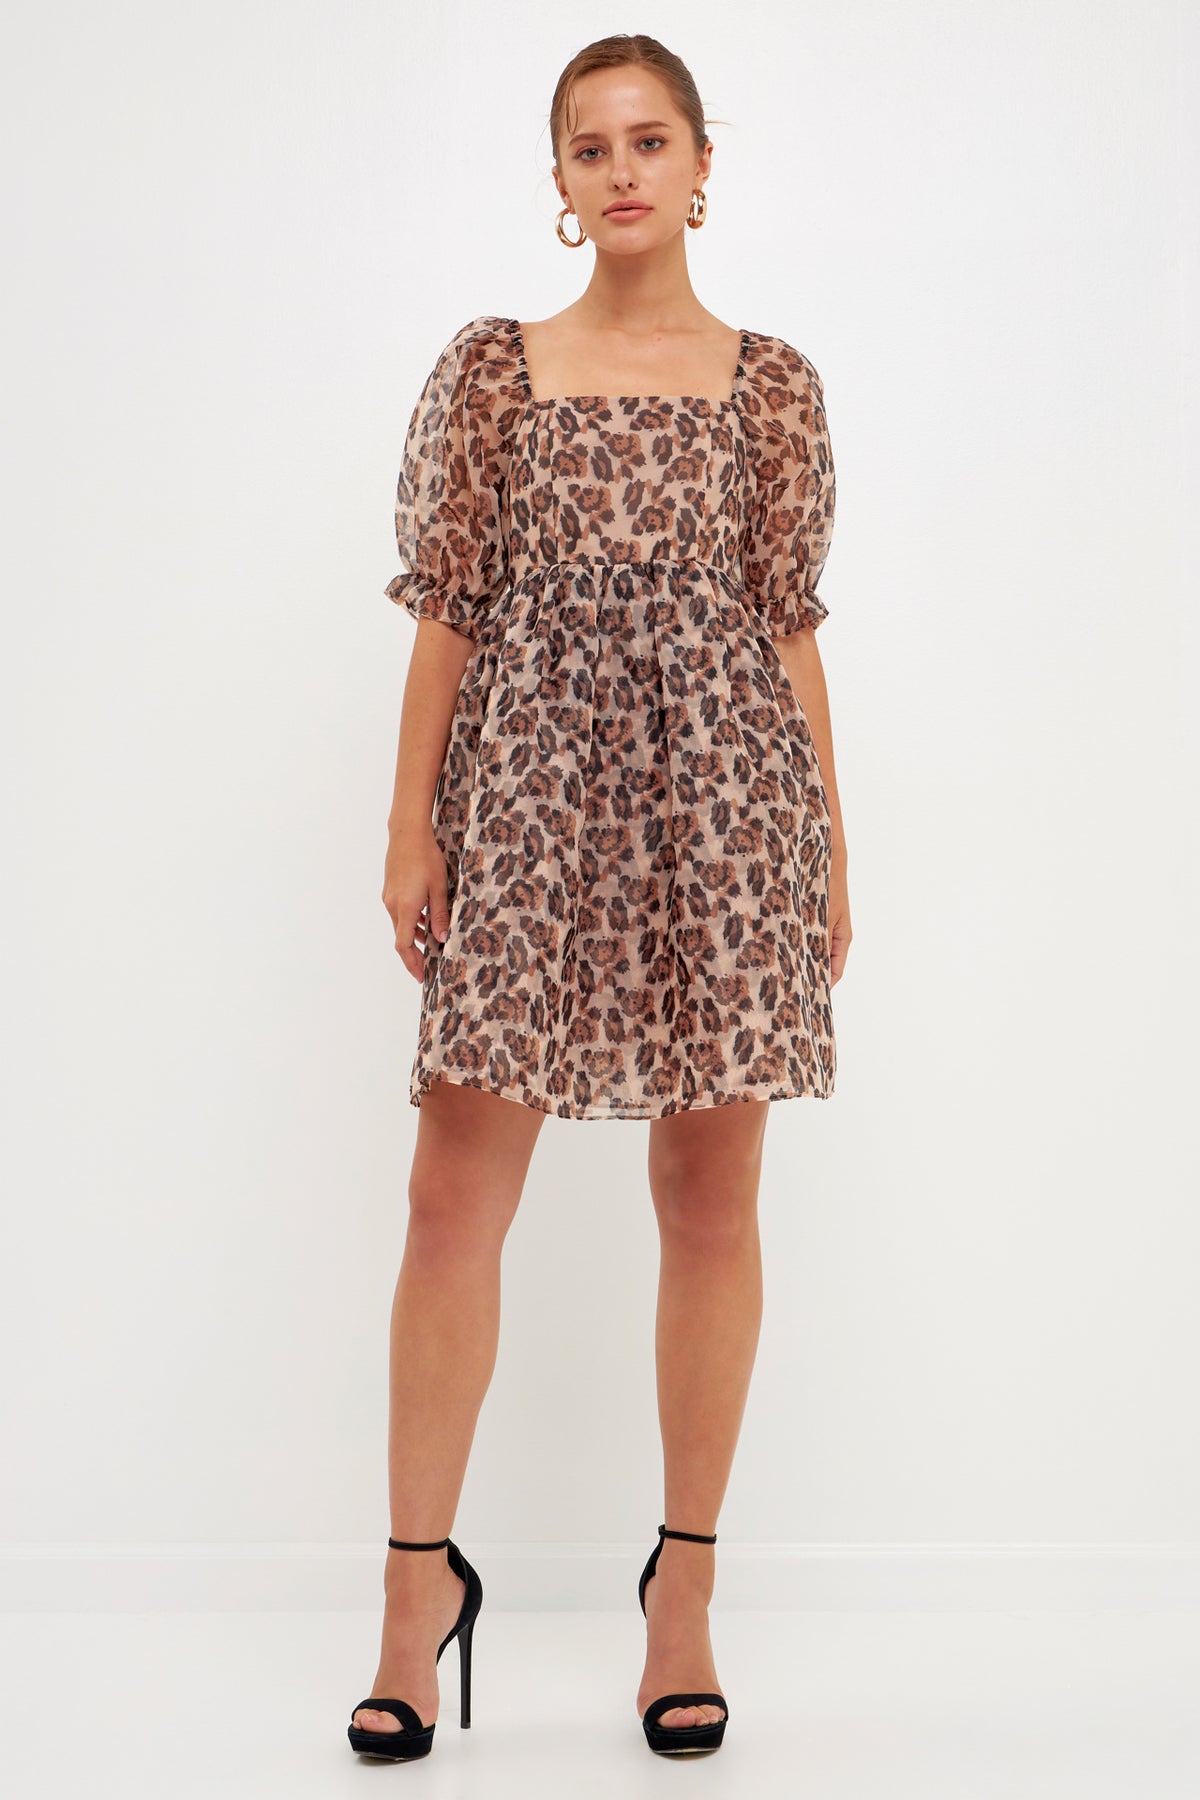 ENDLESS ROSE - Organza Leopard Dress - DRESSES available at Objectrare